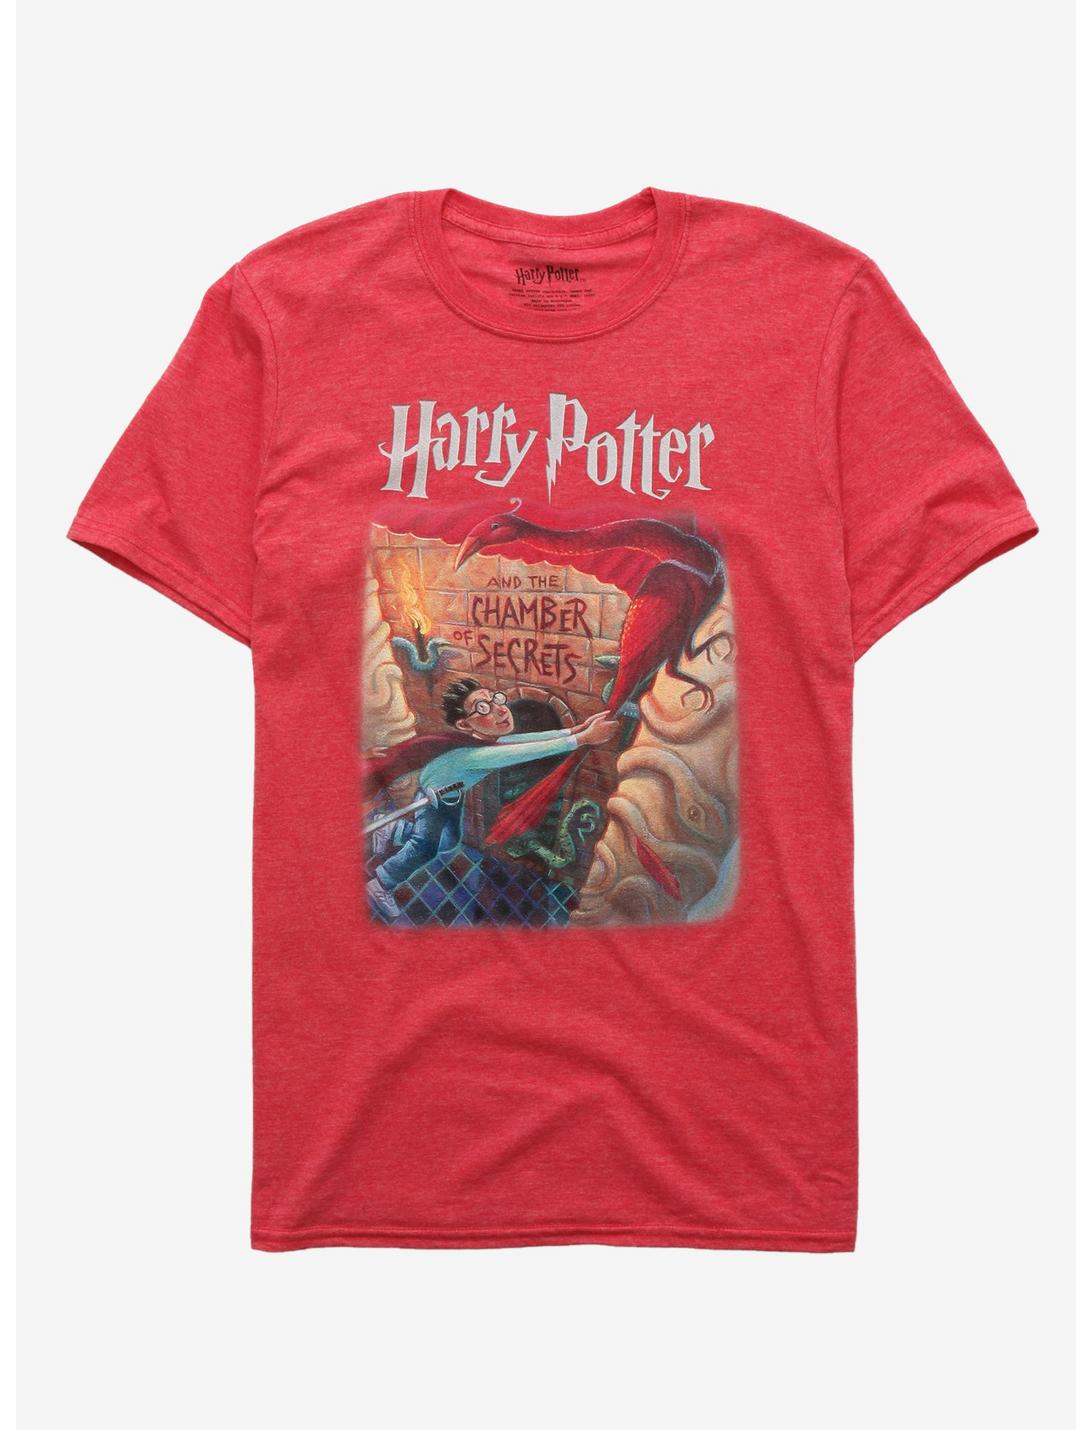 Harry Potter And The Chamber Of Secrets Book Cover T-Shirt, RED, hi-res